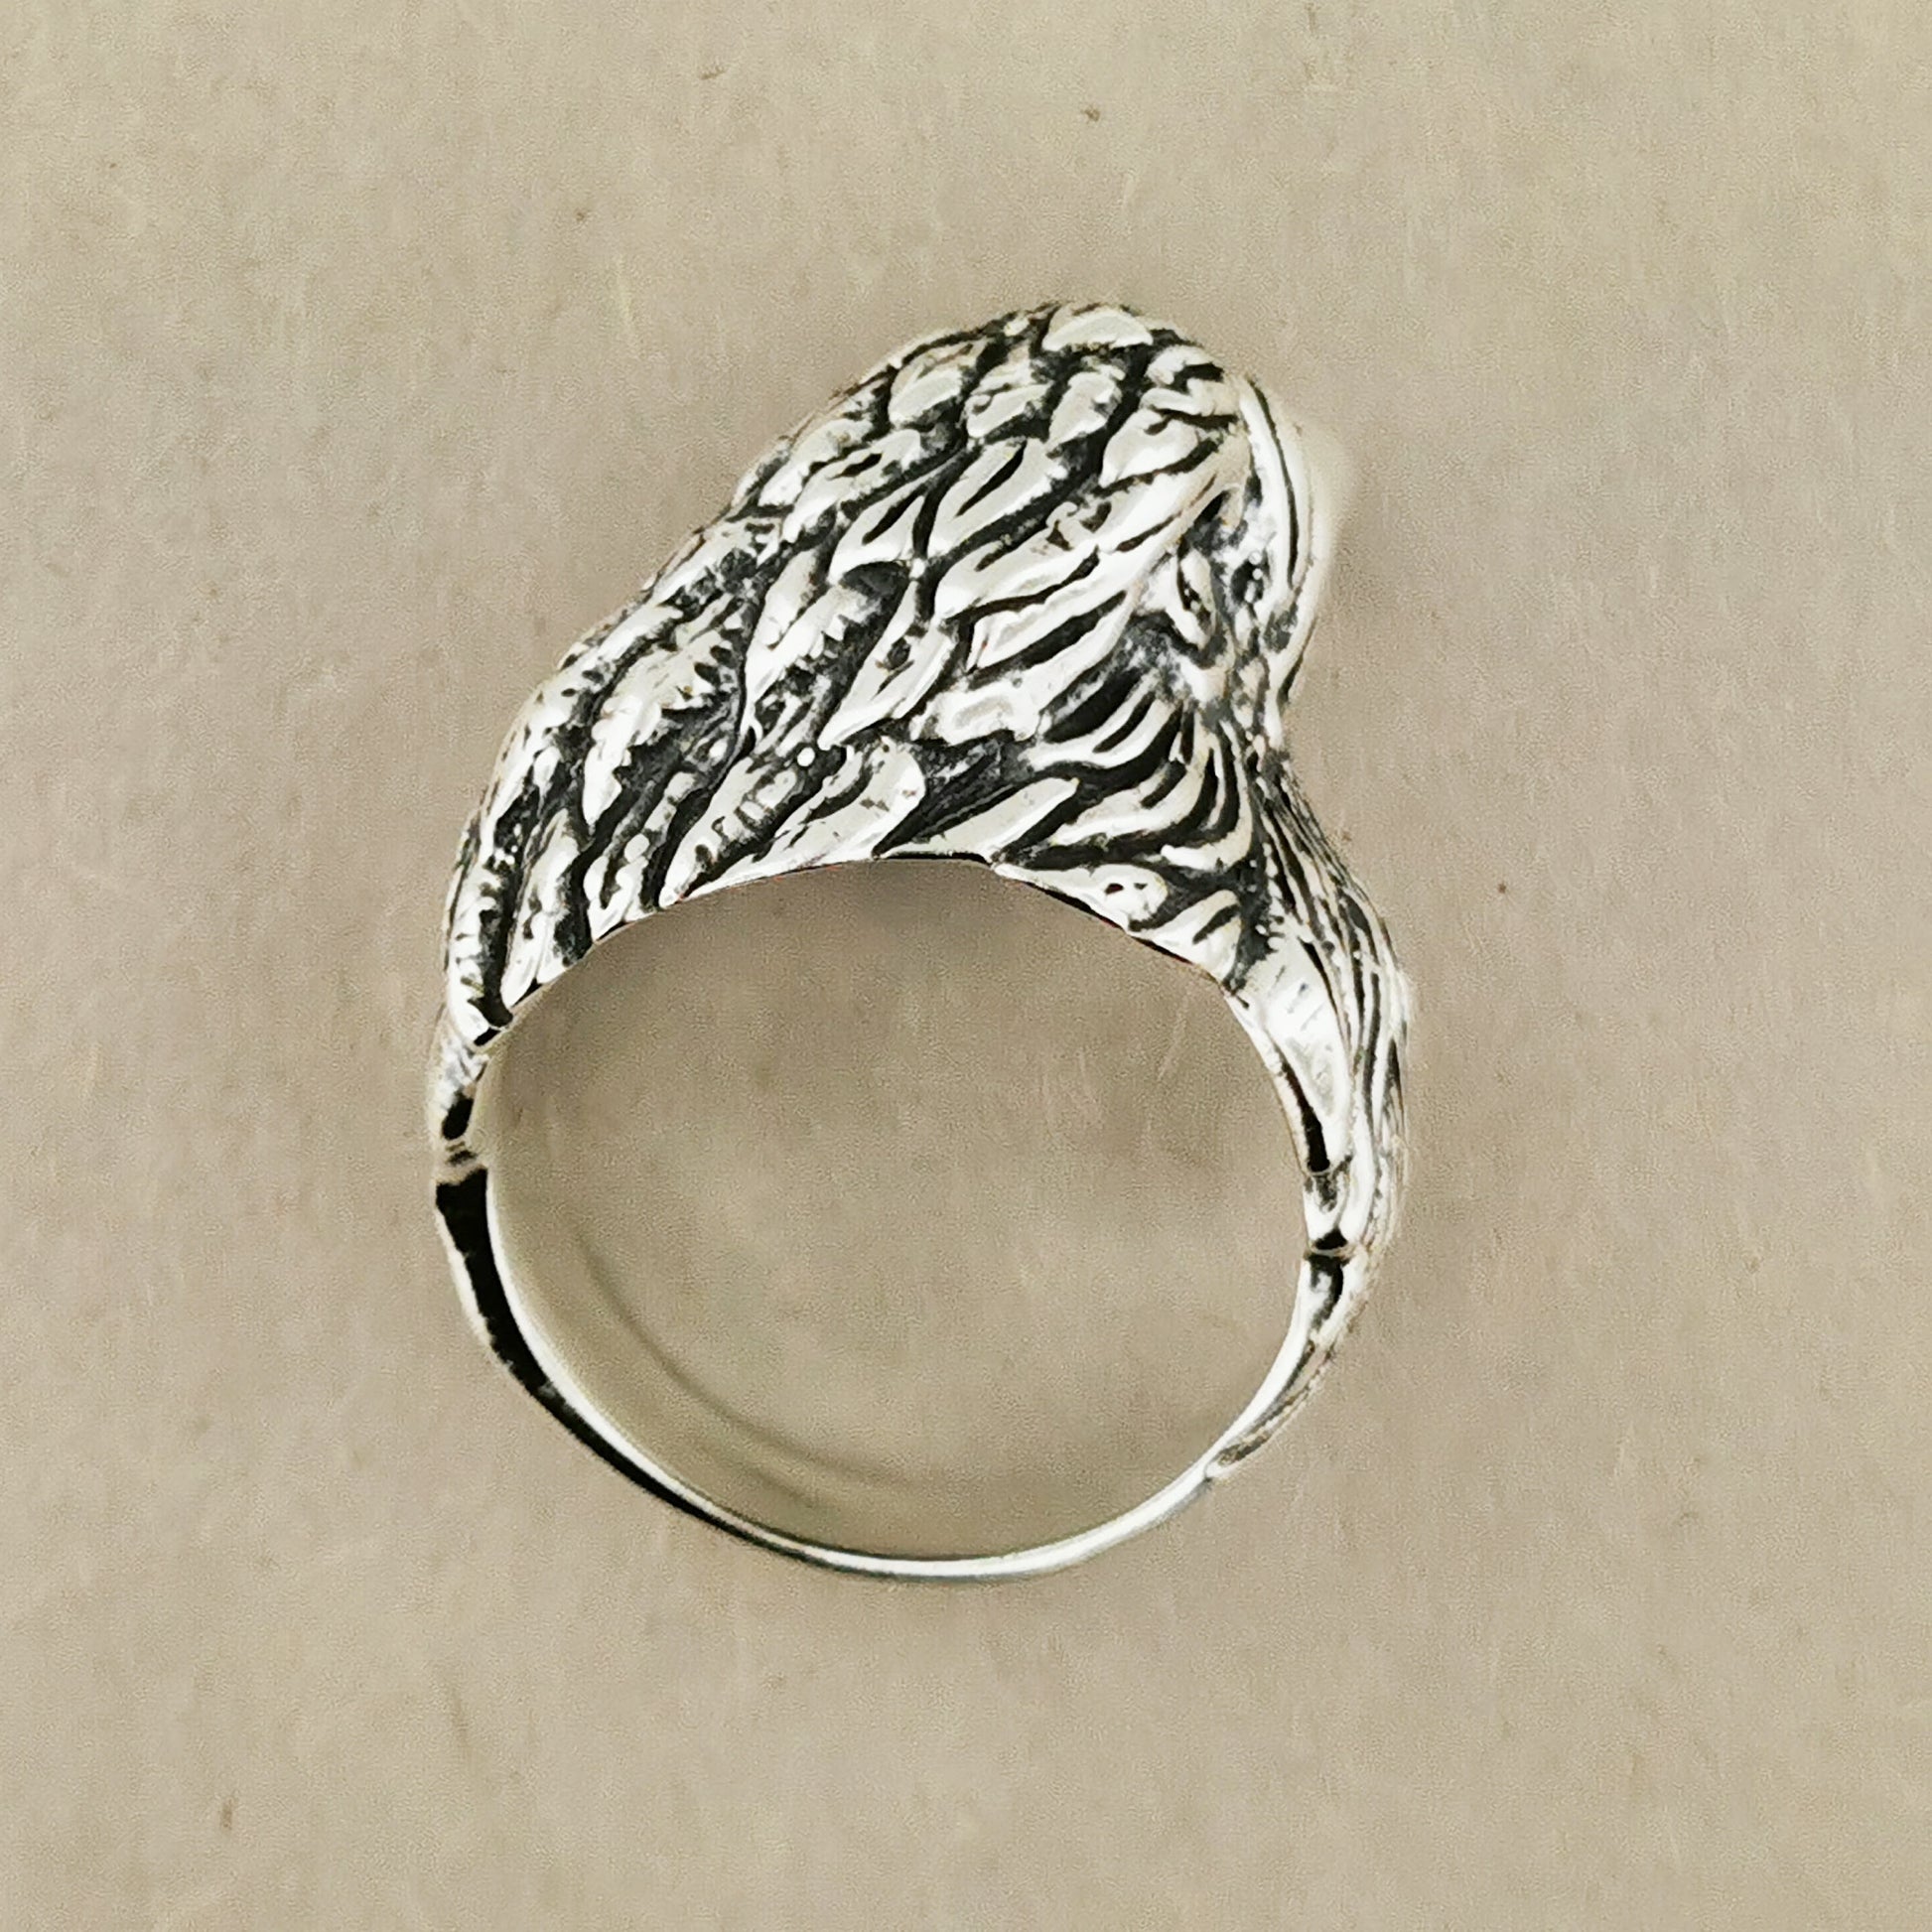 Vintage Design Eagle Head Ring in Sterling Silver or Antique Bronze, Vintage Eagle Ring, Silver Eagle Ring, Bronze Eagle Ring, Silver Animal Ring, Bronze Animal Ring, Silver Bird Ring, Bronze Bird Ring, 50s Style Ring